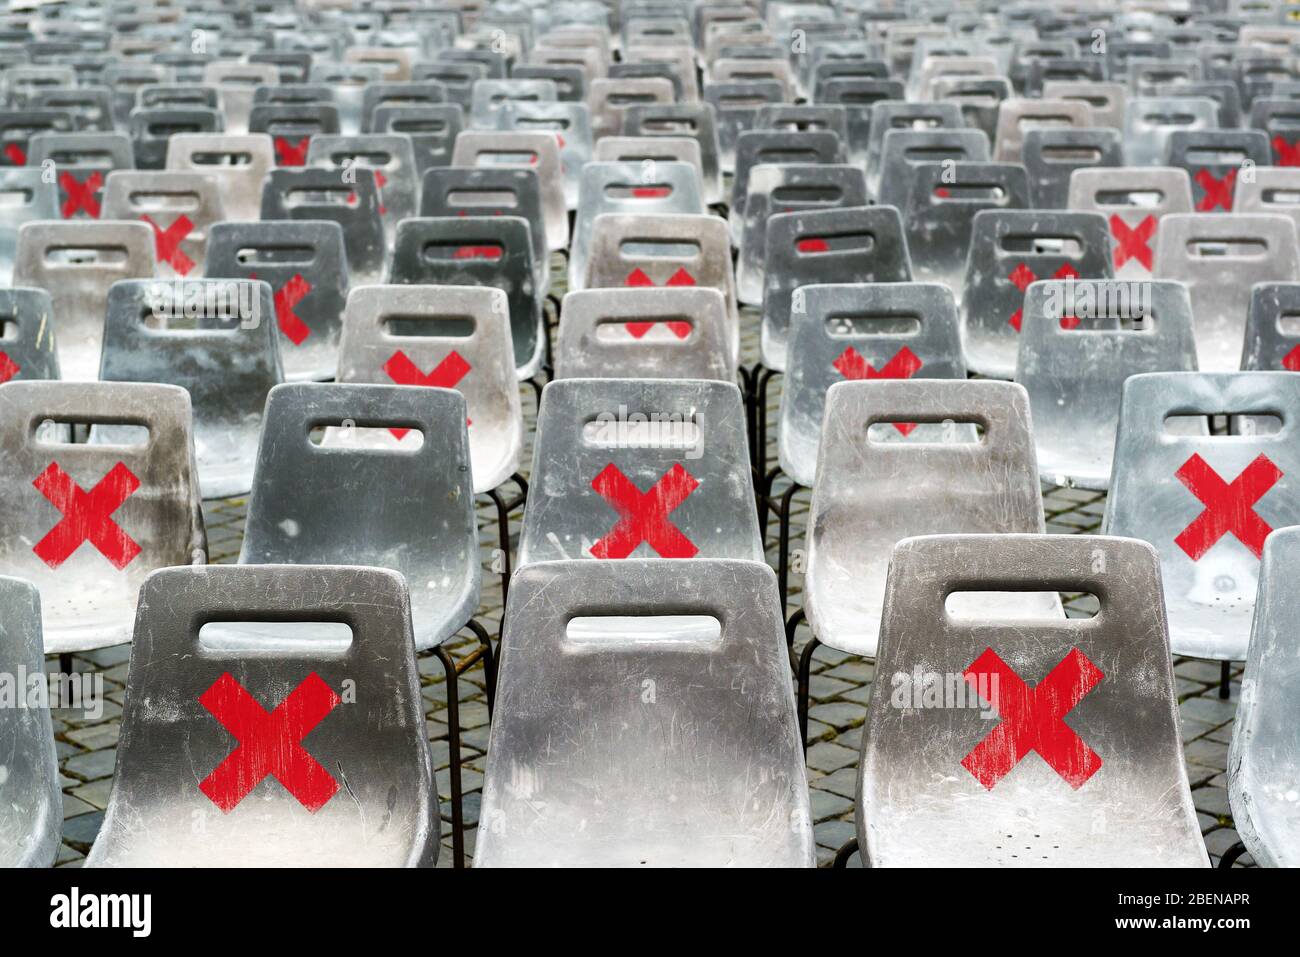 Social distancing concept, warning signs on seats due to coronavirus. Keep safety distance in public place to protect from COVID-19 disease. Stay safe Stock Photo